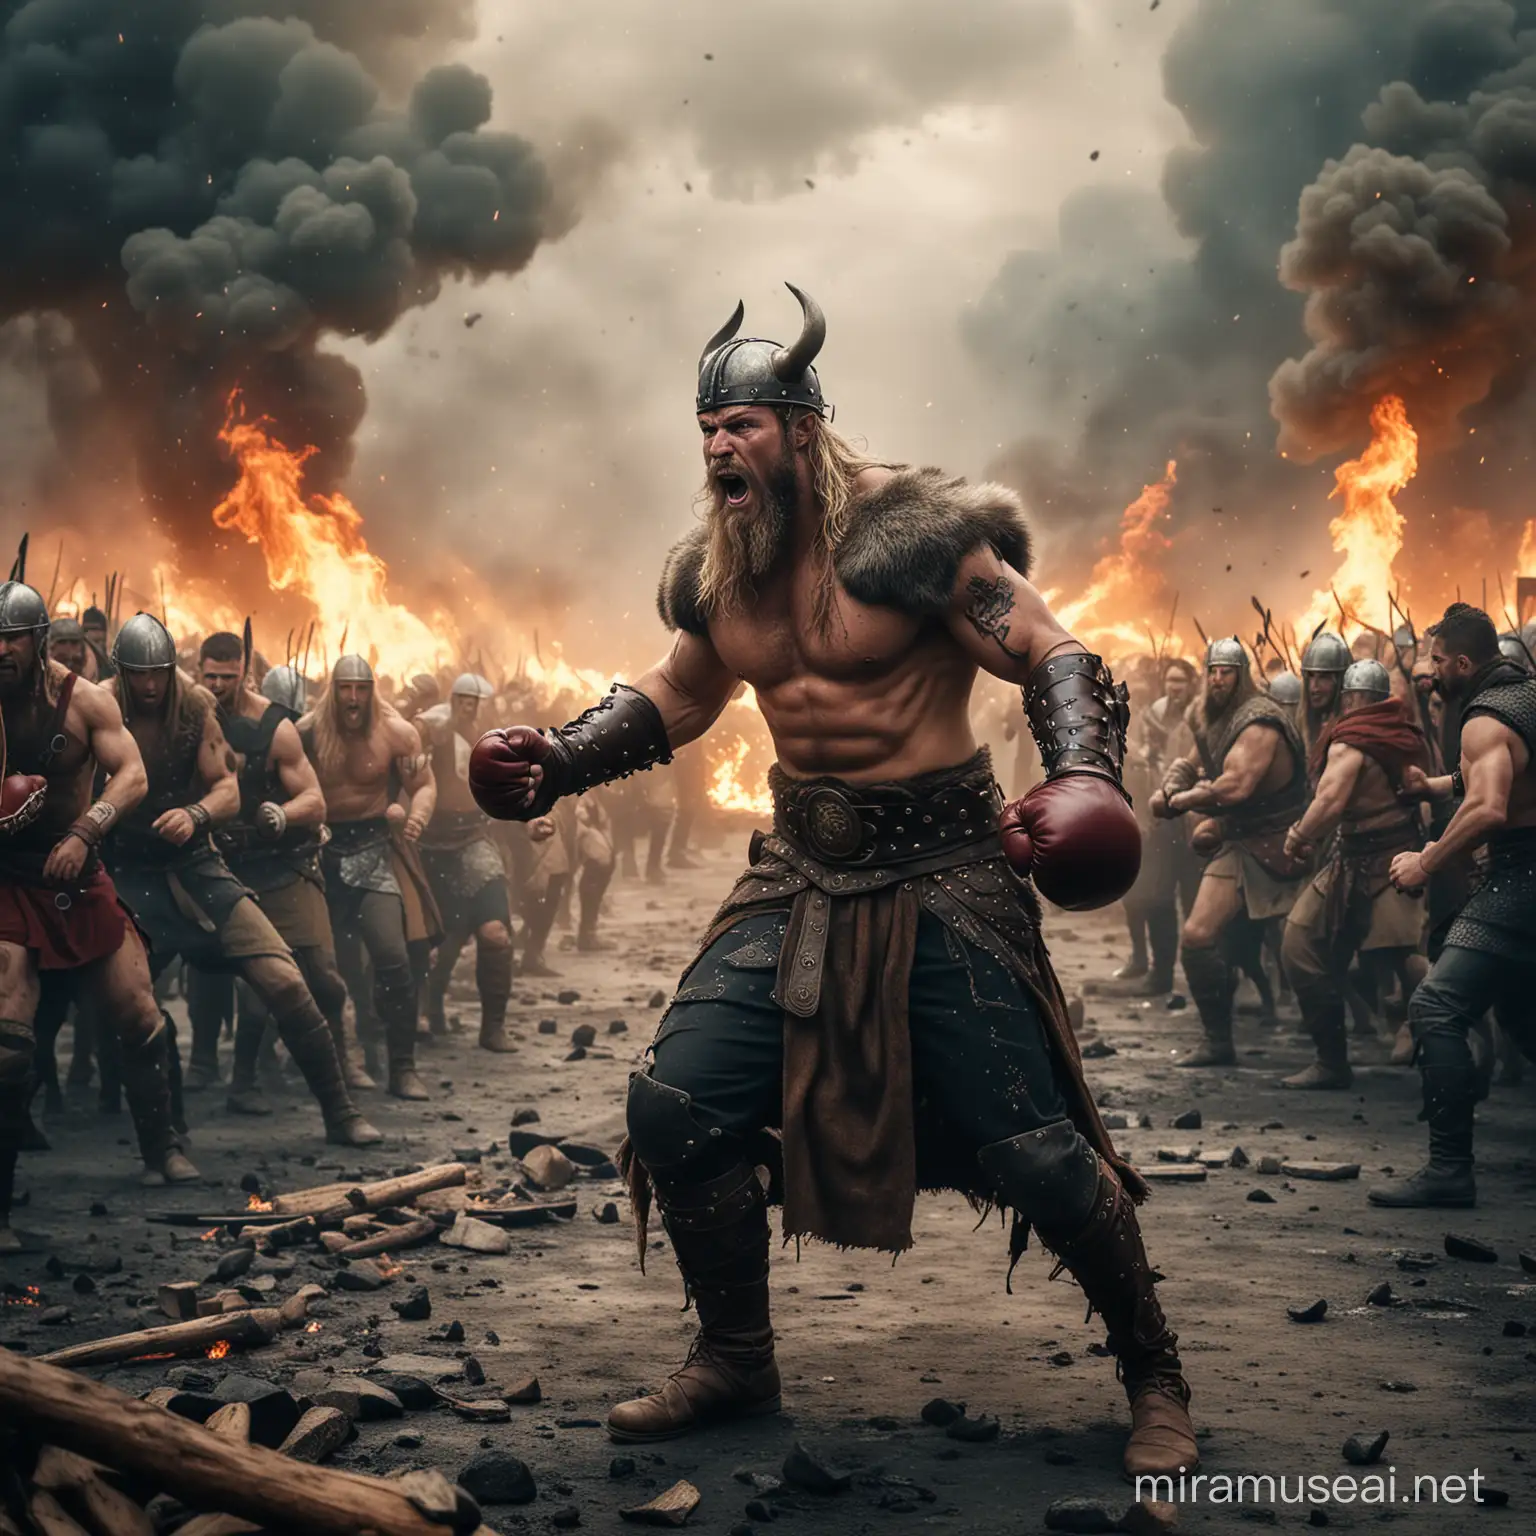 A god Viking fighting in a war with boxing gloves, at the background with fire and thunders, leaving chaos and destructions, while a big crowd of people are following him.